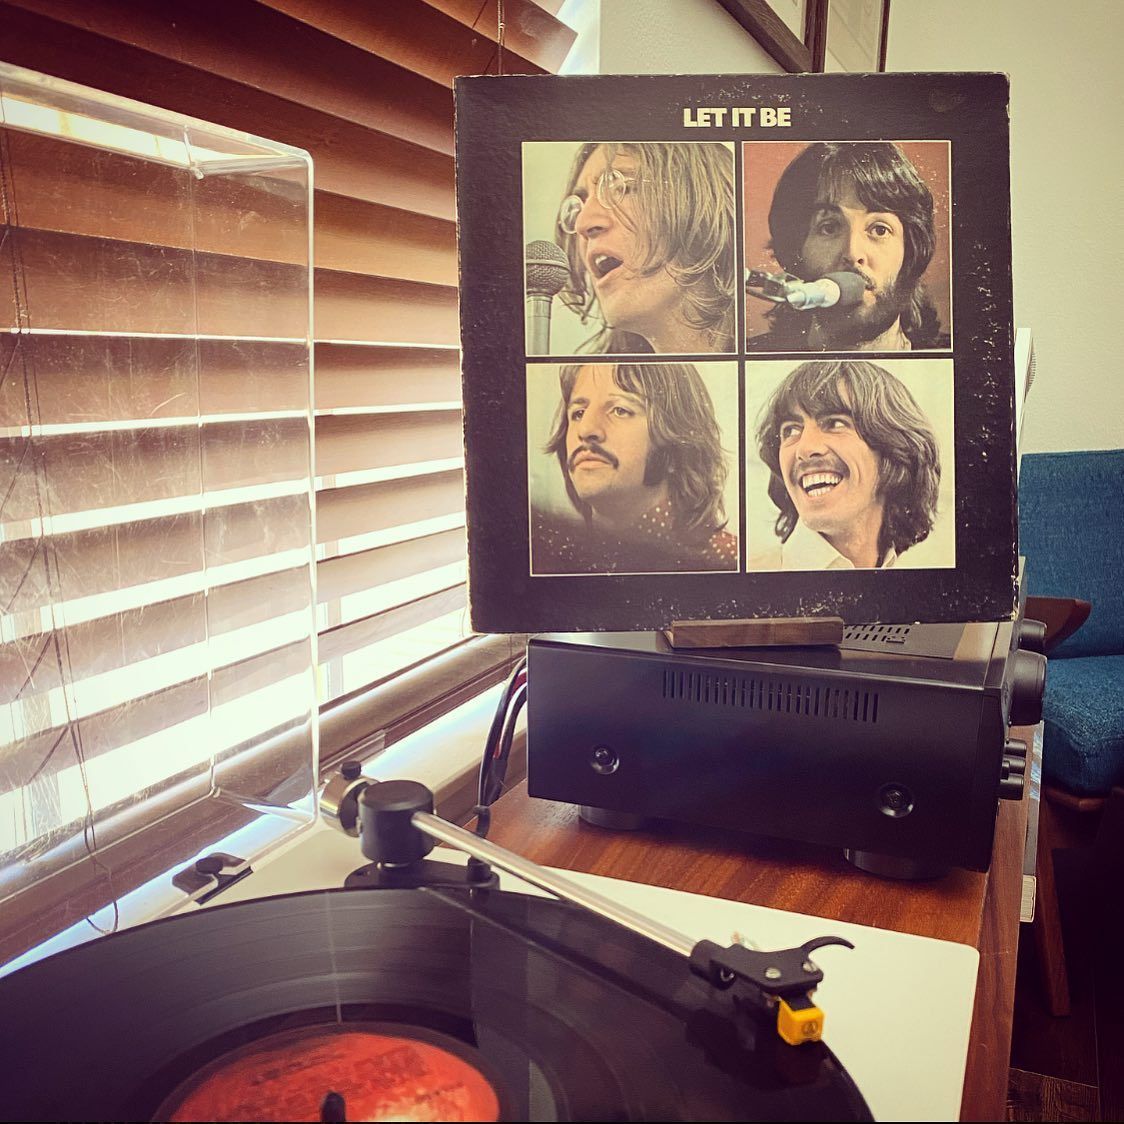 Every crackle and pop of The Beatles' 'Let It Be' tells a story, weaving a tapestry of melodies that echo the essence of an era. 🎶✨

📸 ig: auralcandy 

#collectionvinyl #lovevinyl #vinylmusic #vinylcollectors #vinyllife #recordcollectionpost #recordlover #igvinyl #epicrecords